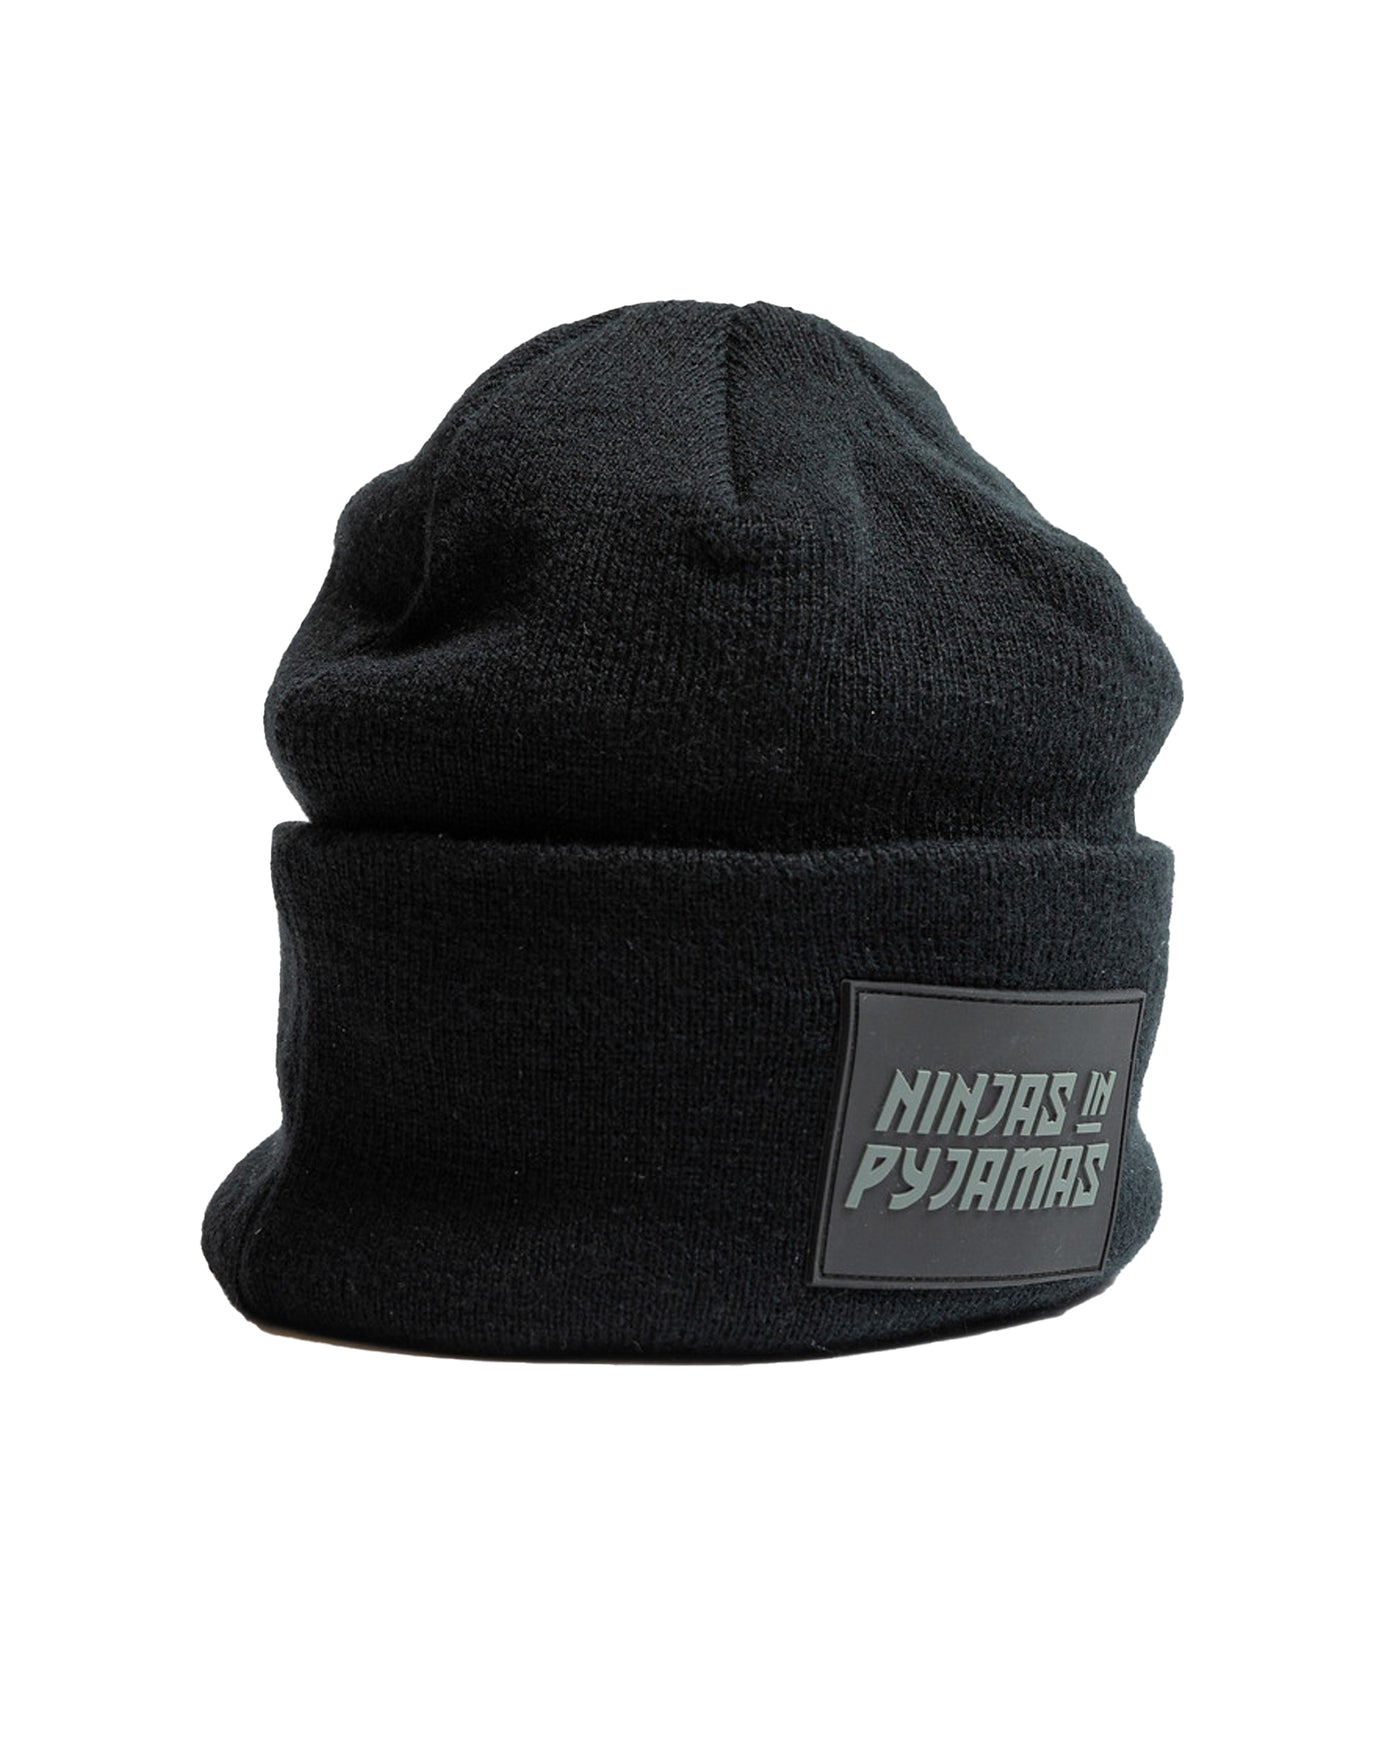 Kurashikku Beanie - Black from Ninjas in Pyjamas Shop. Kurashikku Beanie in Black color from Ninjas in Pyjamas merch. This stylish and warm beanie is a must-have accessory for fans of NiP. Perfect for cold weather and adding a touch of team spirit to any outfit.